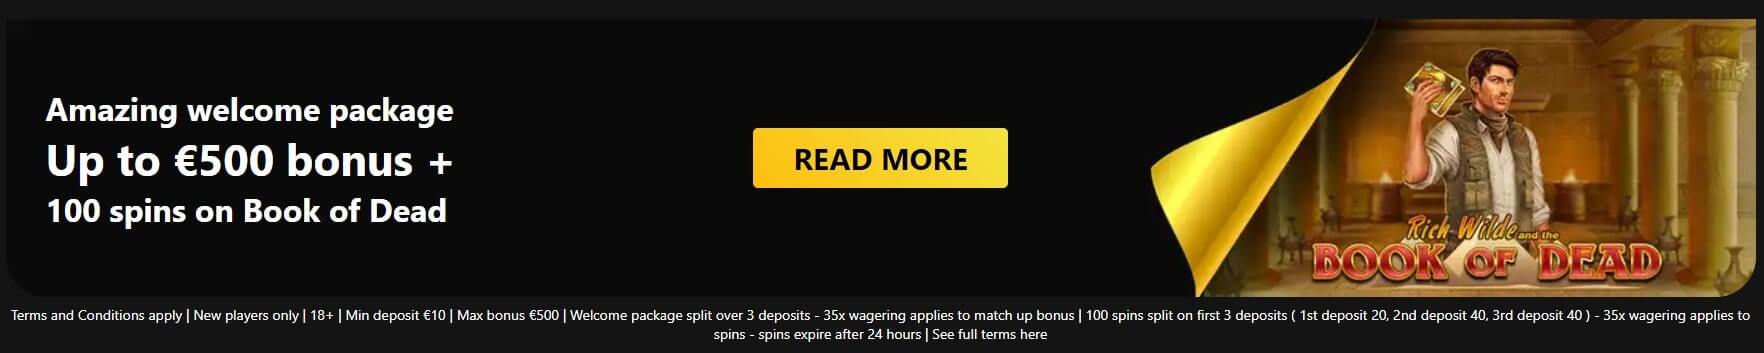 vips casino welcome offer